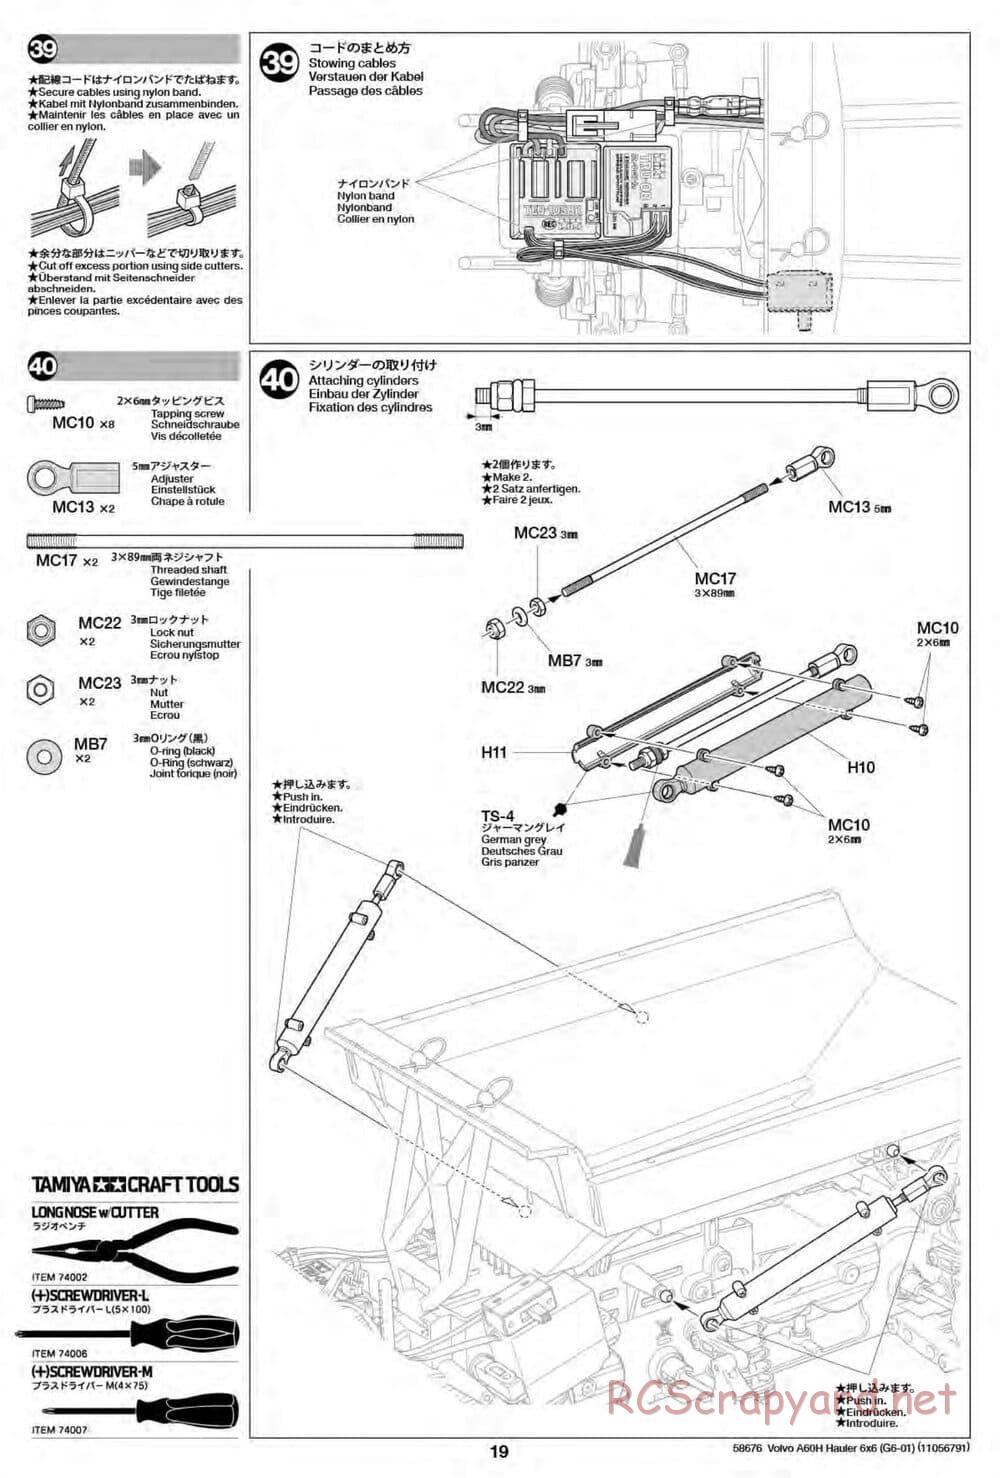 Tamiya - Volvo A60H Dump Truck 6x6 - G6-01 Chassis - Manual - Page 18